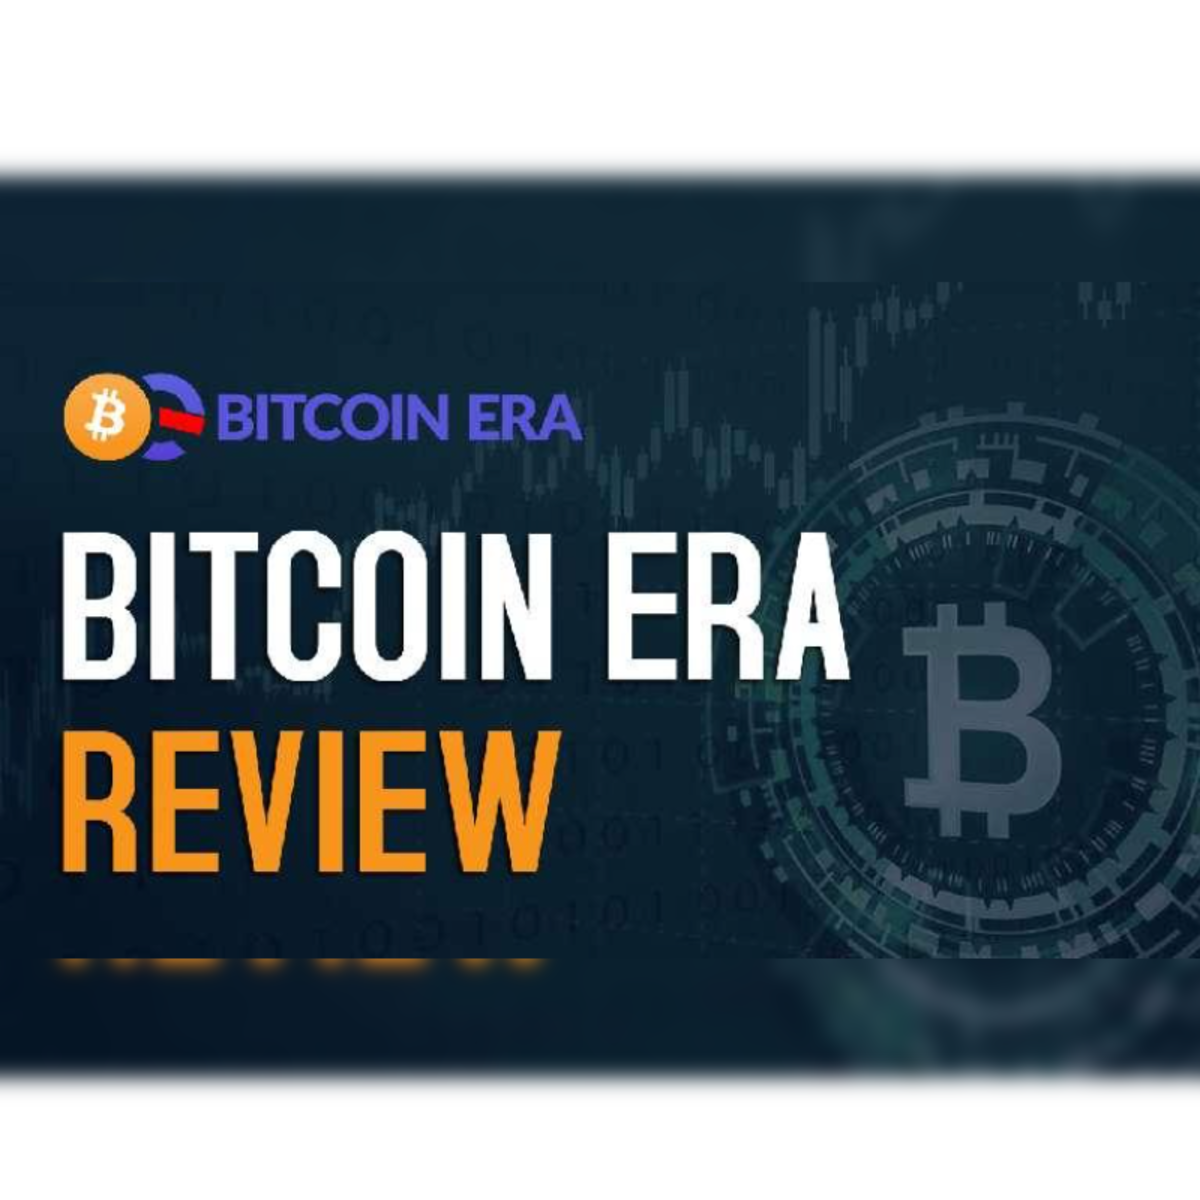 Bitcoin Era Review | Its Legitimacy and Profitability: Is It Real or Not?